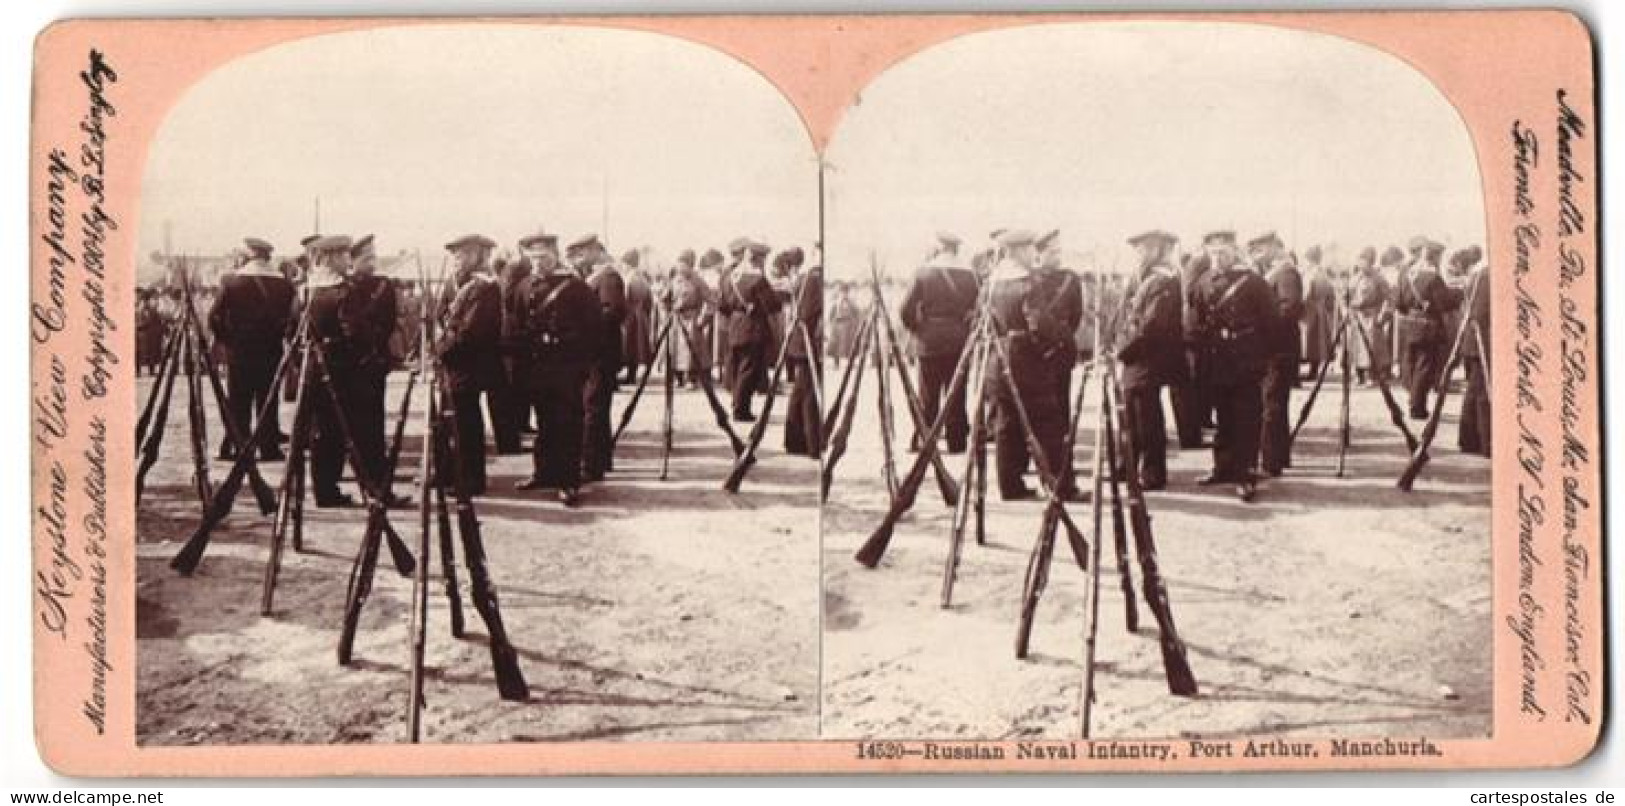 Stereo-Fotografie Keystone View Company, Meadville /Pa, Ansicht Port Arthur /Manchuria, Russian Naval Infantry  - Stereo-Photographie